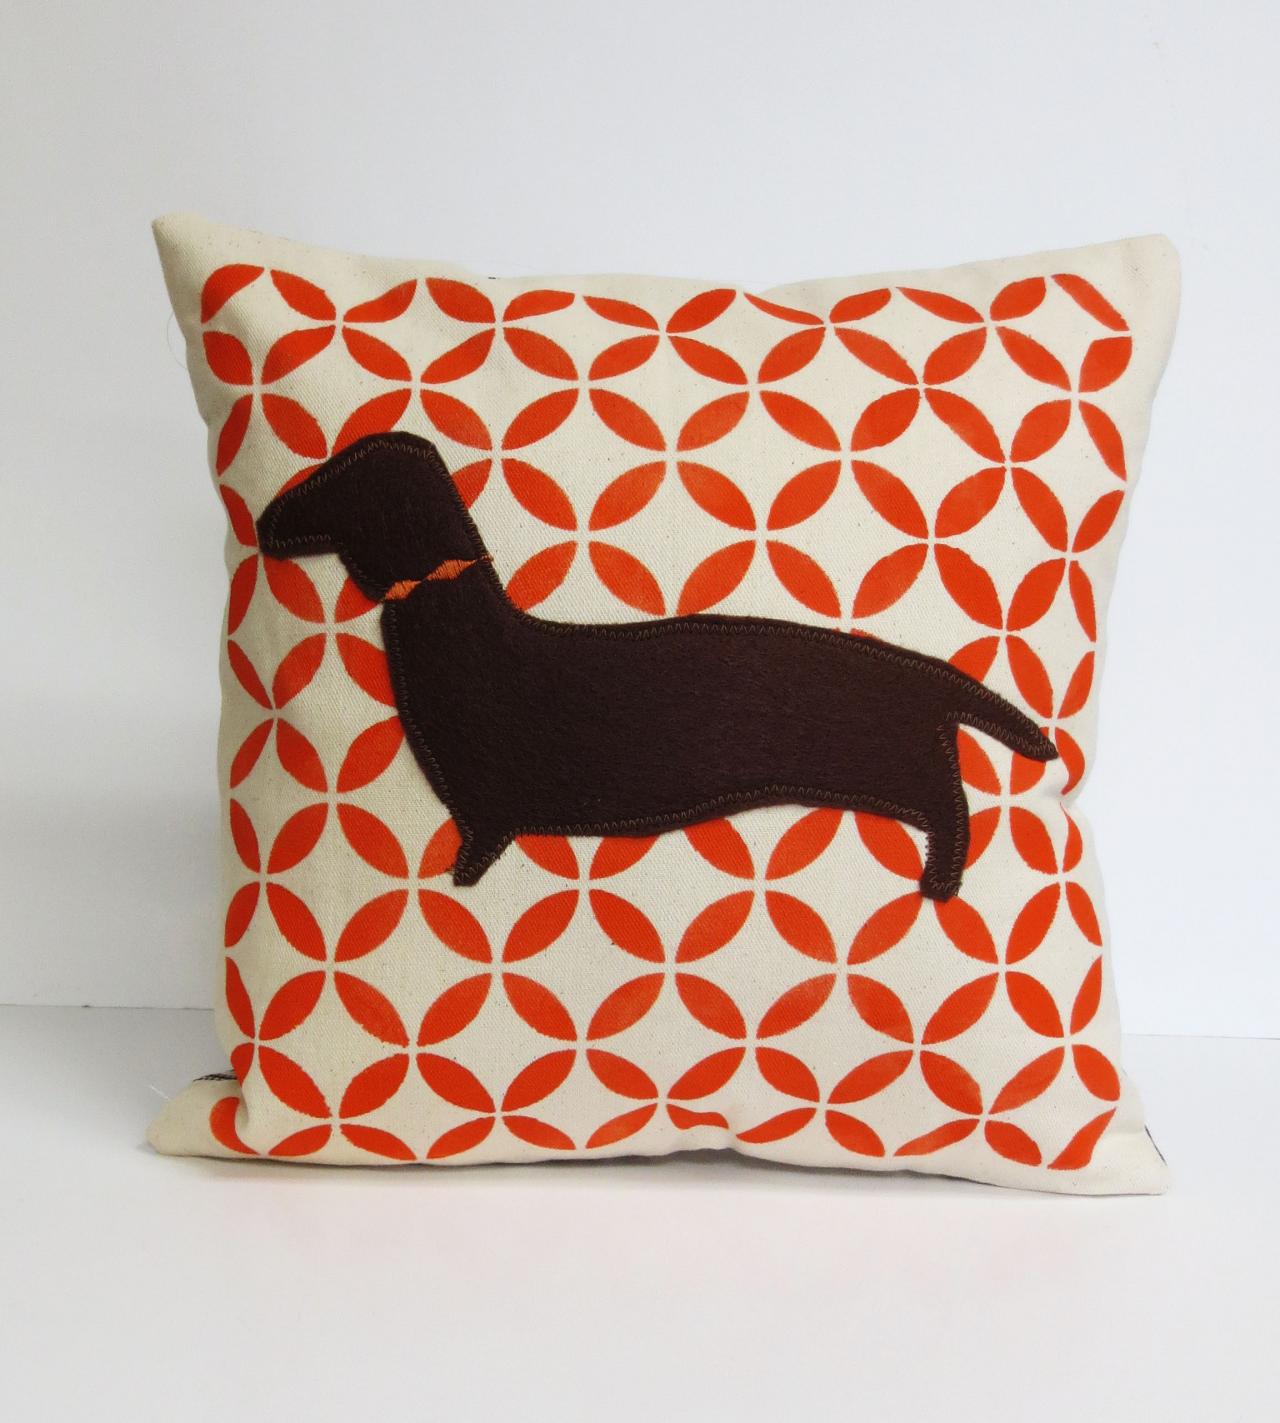 Hand Printed Pillow Cover With Felt Dachshund Applique